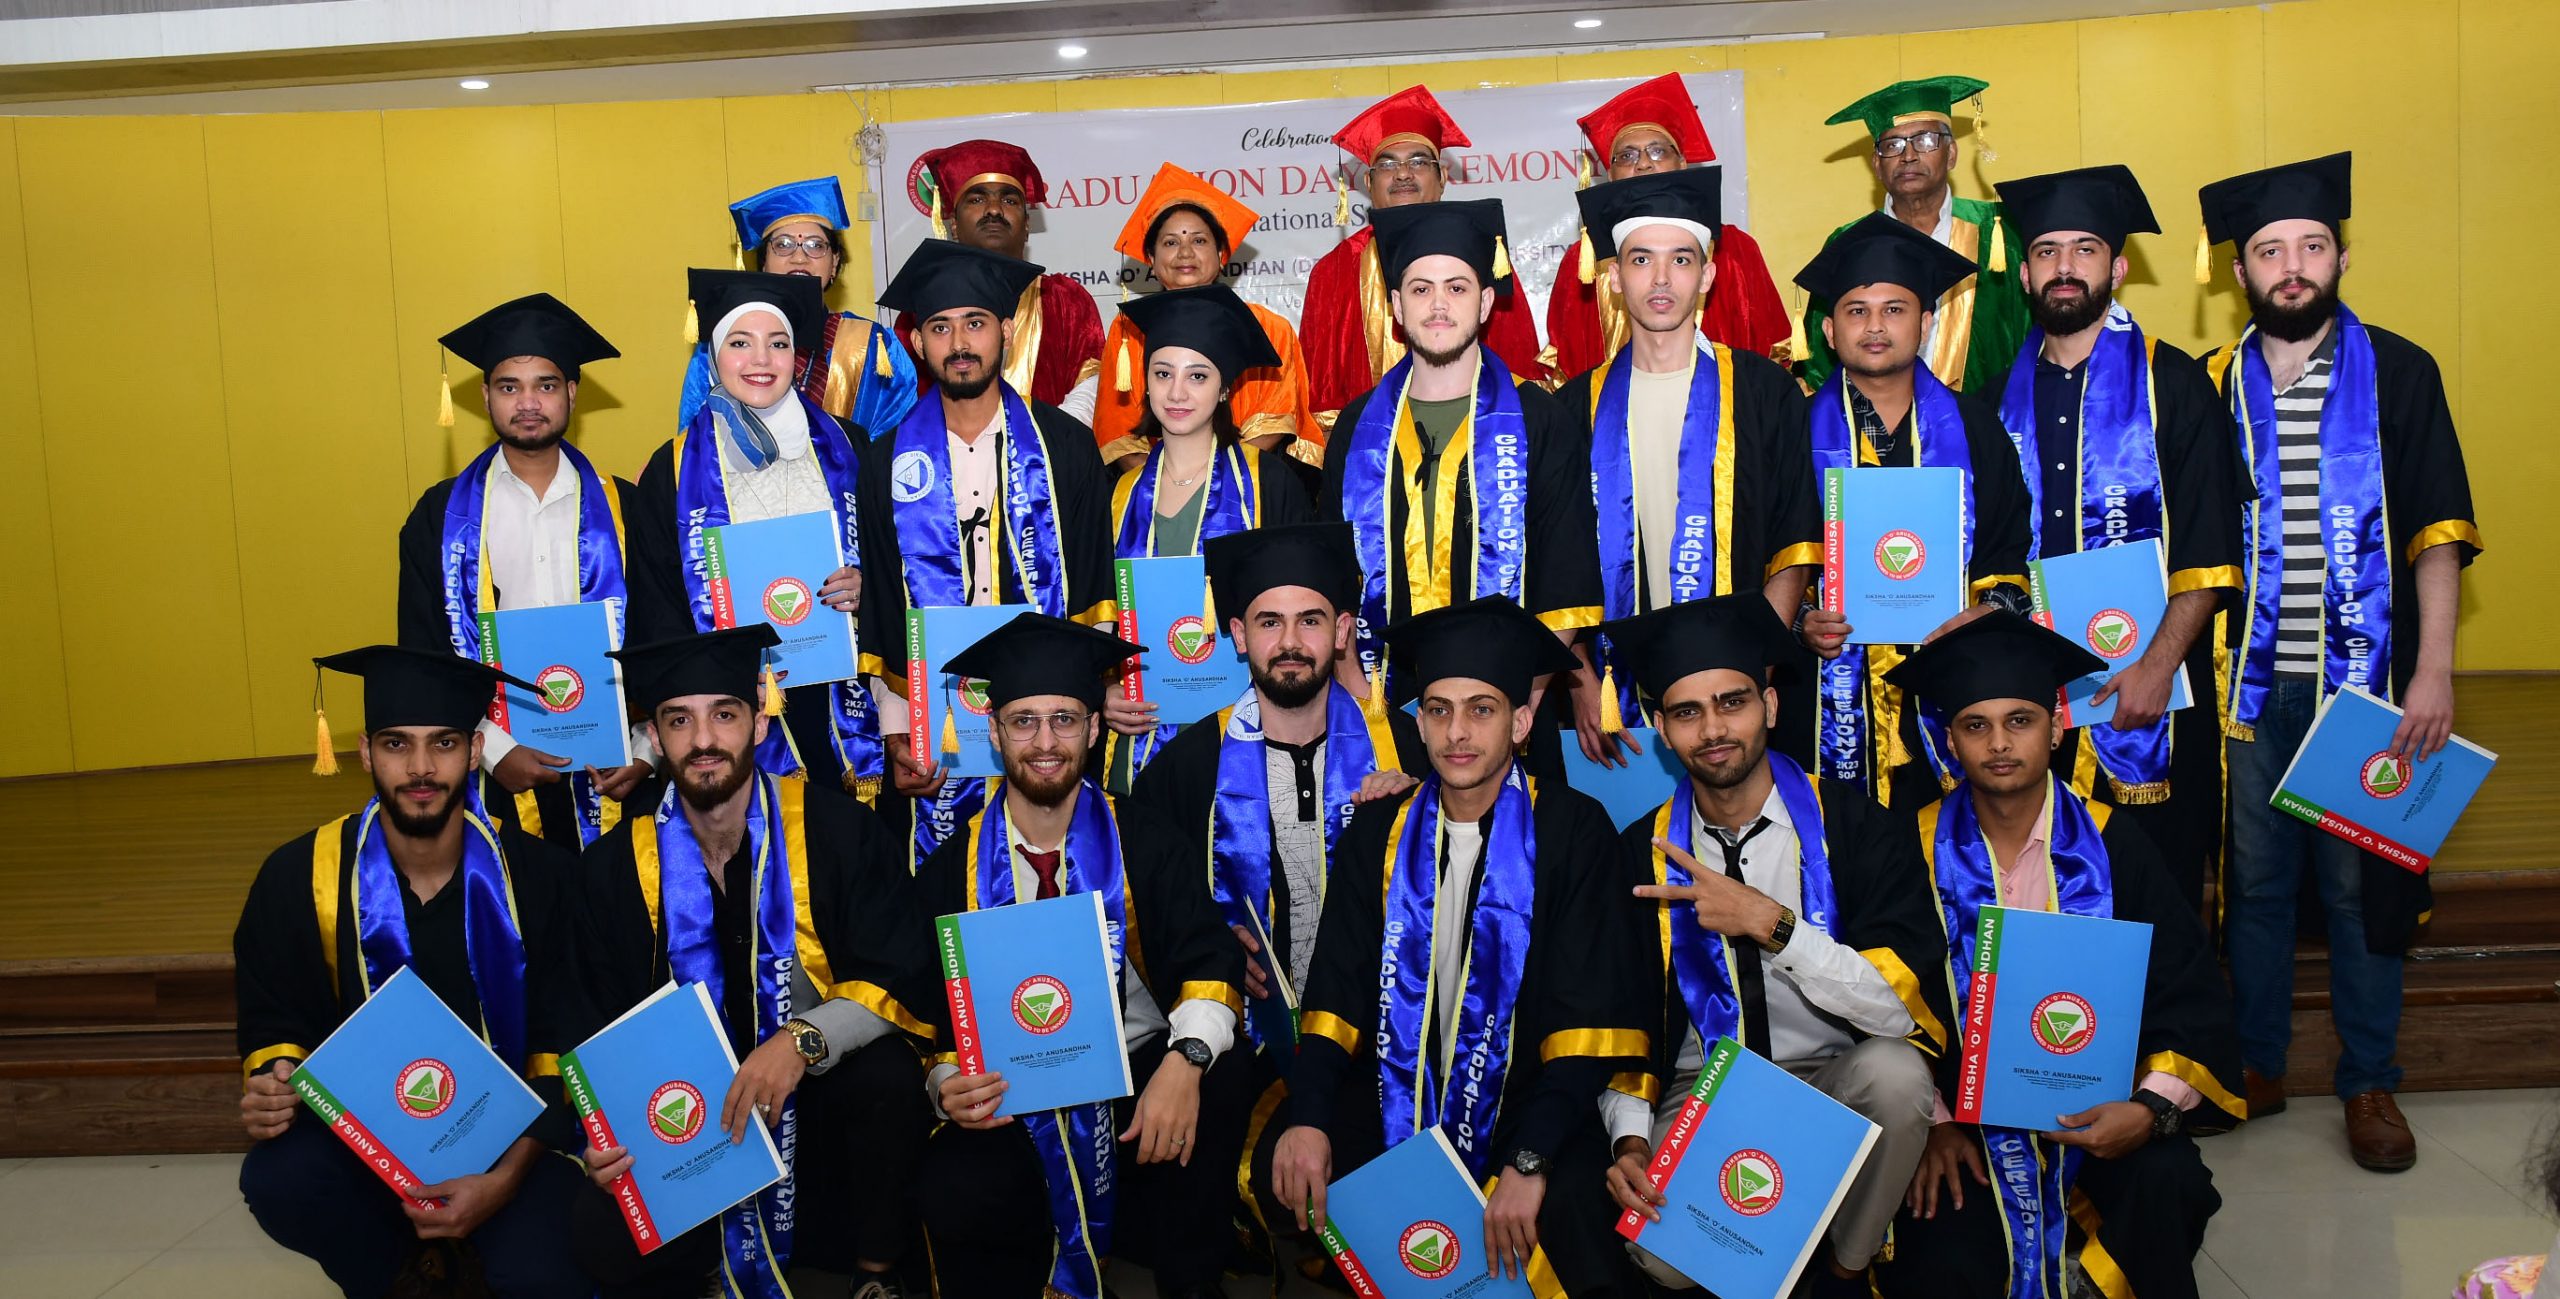 GRADUATION CEREMONY FOR FOREIGN STUDENTS HELD AT SOA